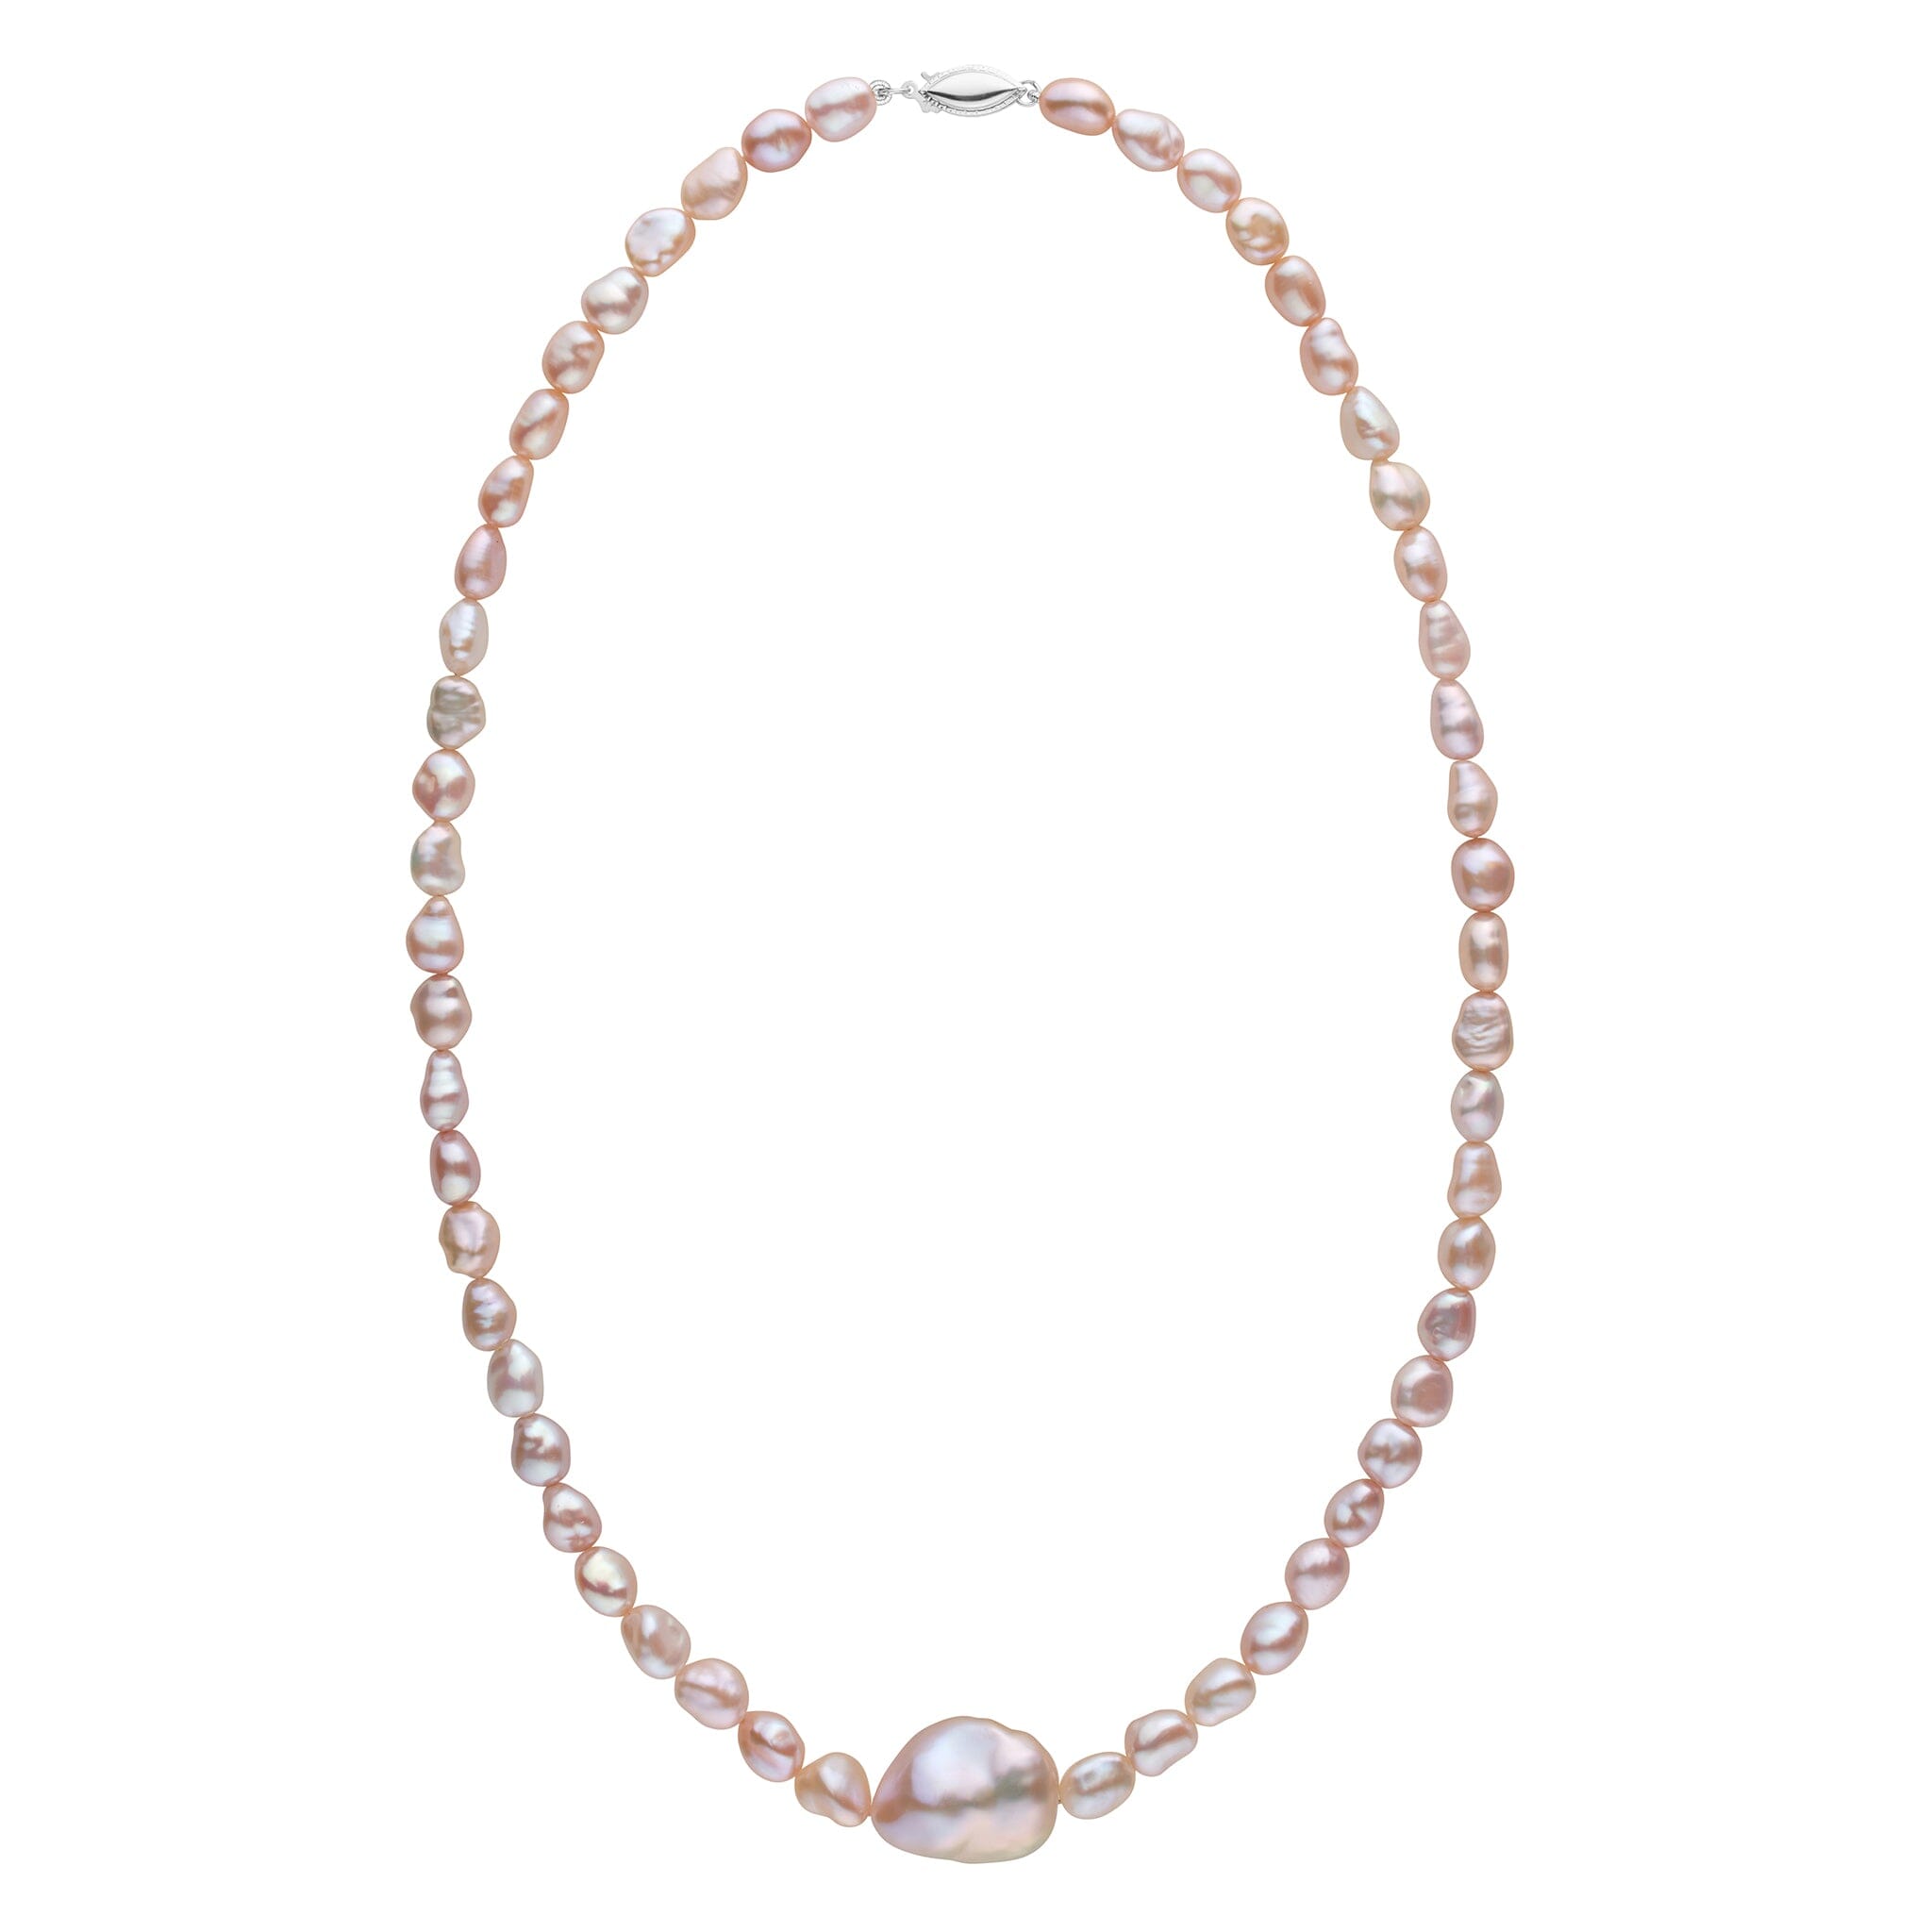 4.0-5.0 mm Metallic Pink Keshi Pearl Necklace with Freshwater Soufflé Pearl Center